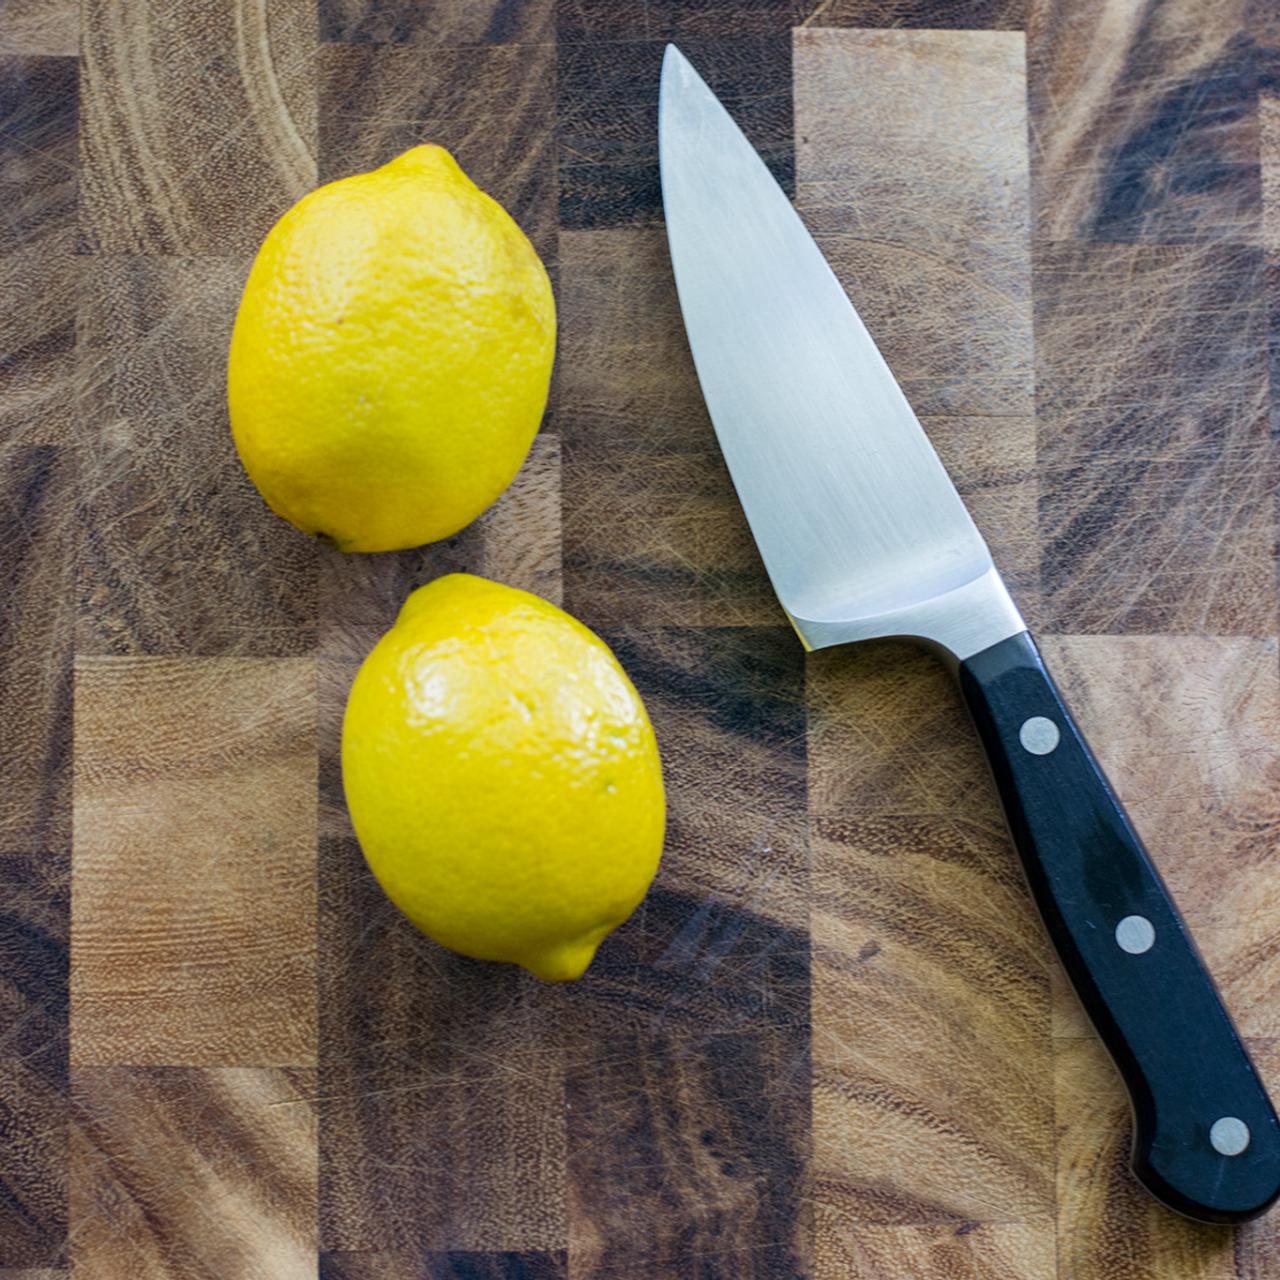 How to Naturally Clean, Deodorize, and Disinfect a Cutting Board